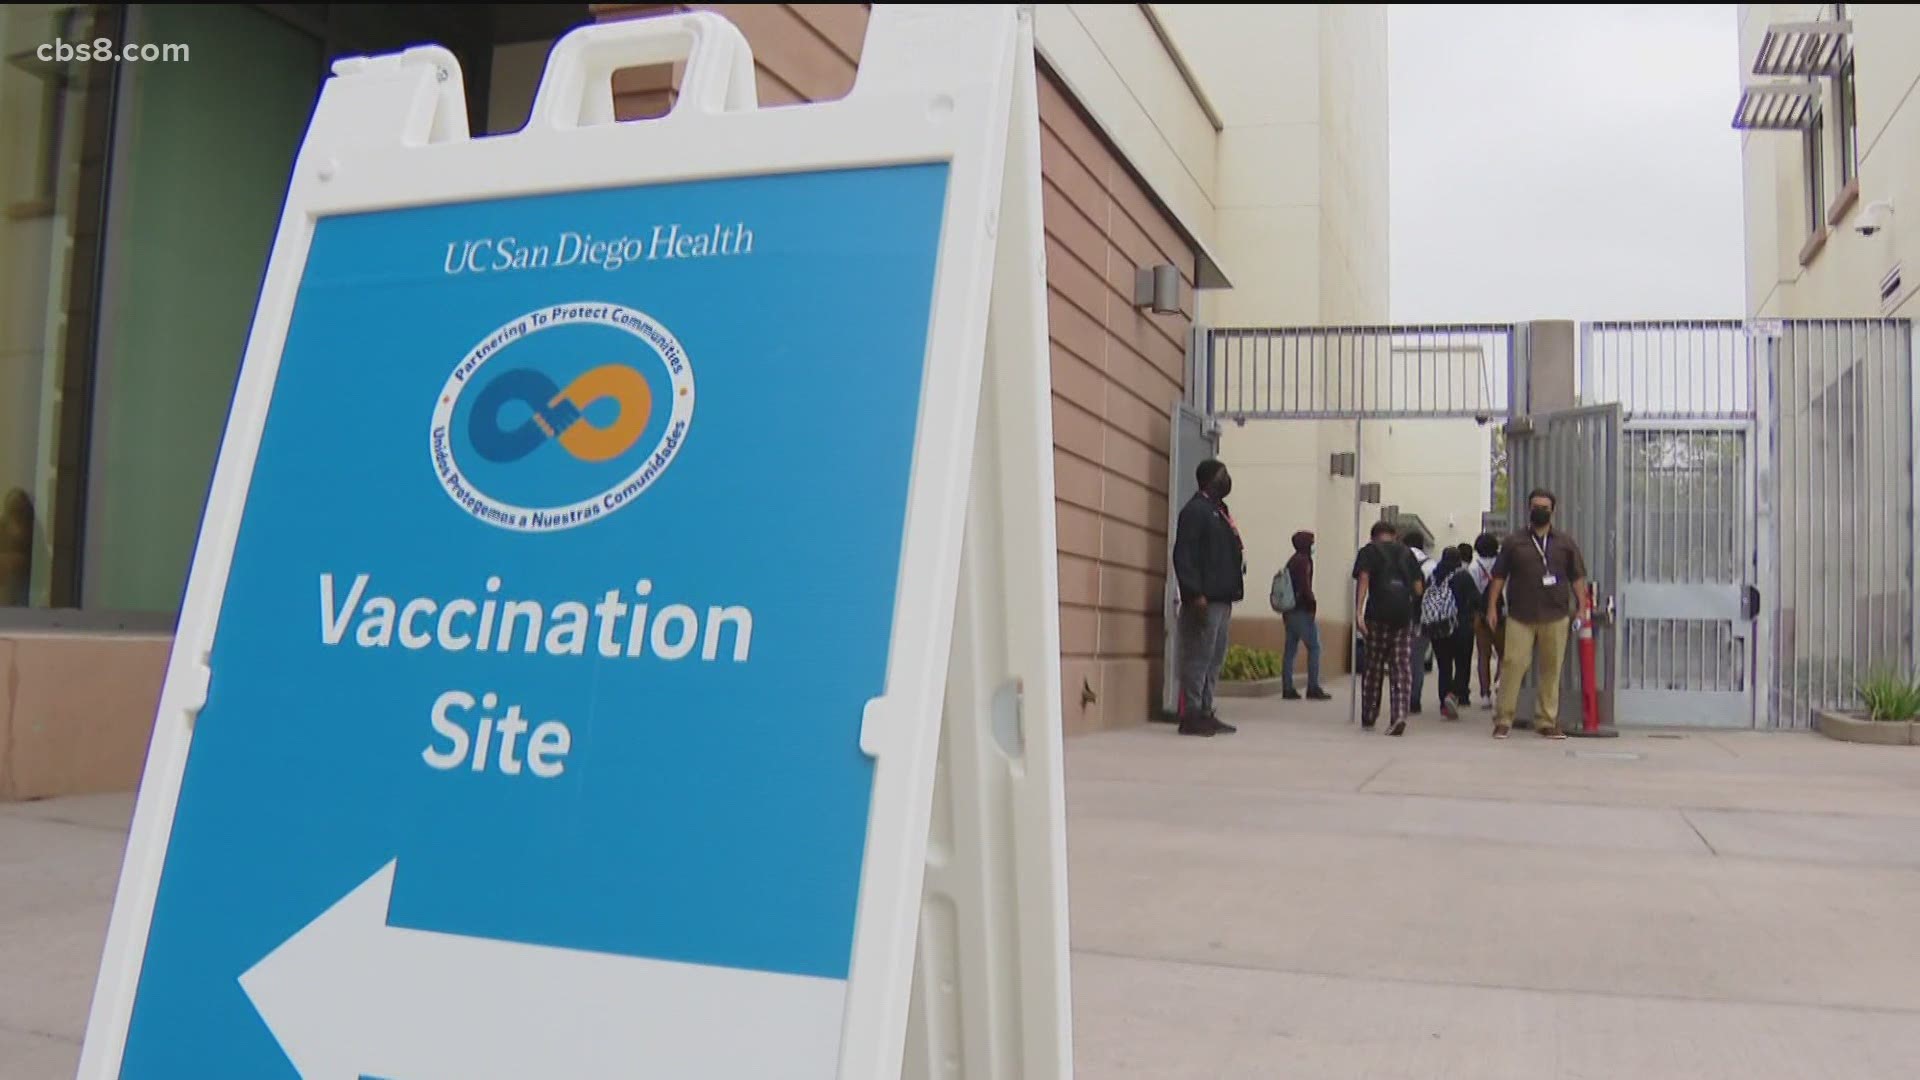 Starting Monday, walk-in vaccination clinics will be open at various high school campuses for anyone 16 and up